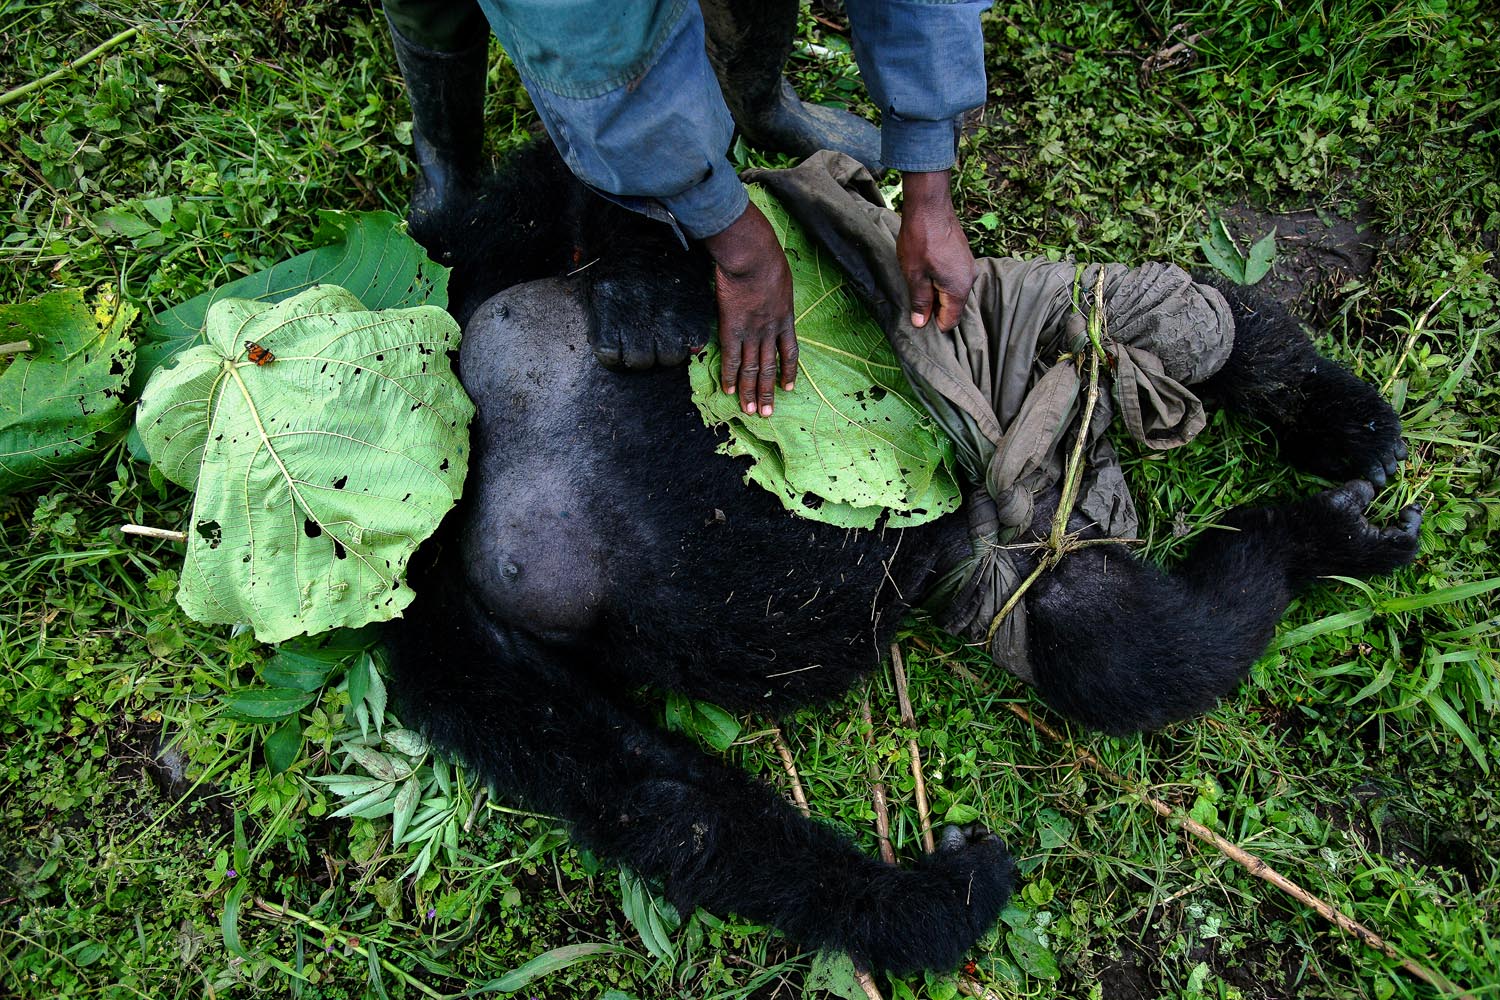 MIKENO, EASTERN DR CONGO, July 24, 2007: Local villagers help to dress and evacuate the body of a female, lactating mountain gorilla who has been shot multiple times by AK47 rounds. It is believed that her baby has been taken and it has never been recovered. She is one of 7 mountain gorillas shot by an armed group on this day. Mountain Gorillas are extremely rare, with just over 700 in the world today. They exist in the Virunga ranges of DR Congo, Rwanda and Uganda. The group in DR Congo numbers just over 300 and their region is occupied by the M23 rebel group, formerly known as CNDP. Despite the conflict in the region, the gorillas remain, a fragile, threatened group that also have poachers and human encroachment to fear. (Photo by Brent Stirton/Reportage by Getty Images.)